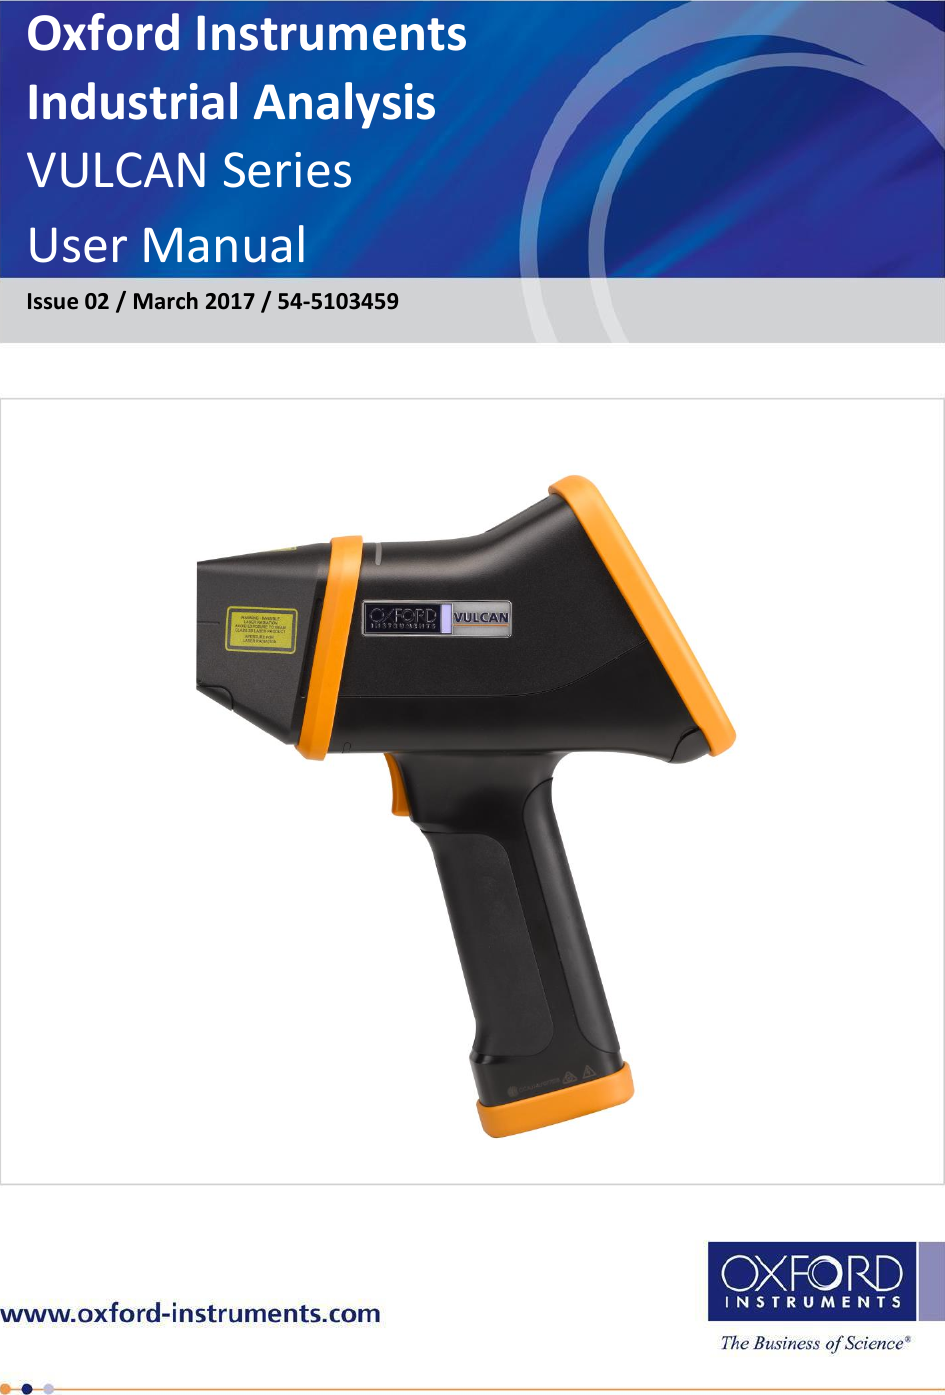 Oxford Instruments Industrial Analysis VULCAN Series  User Manual Issue 02 / March 2017 / 54-5103459  